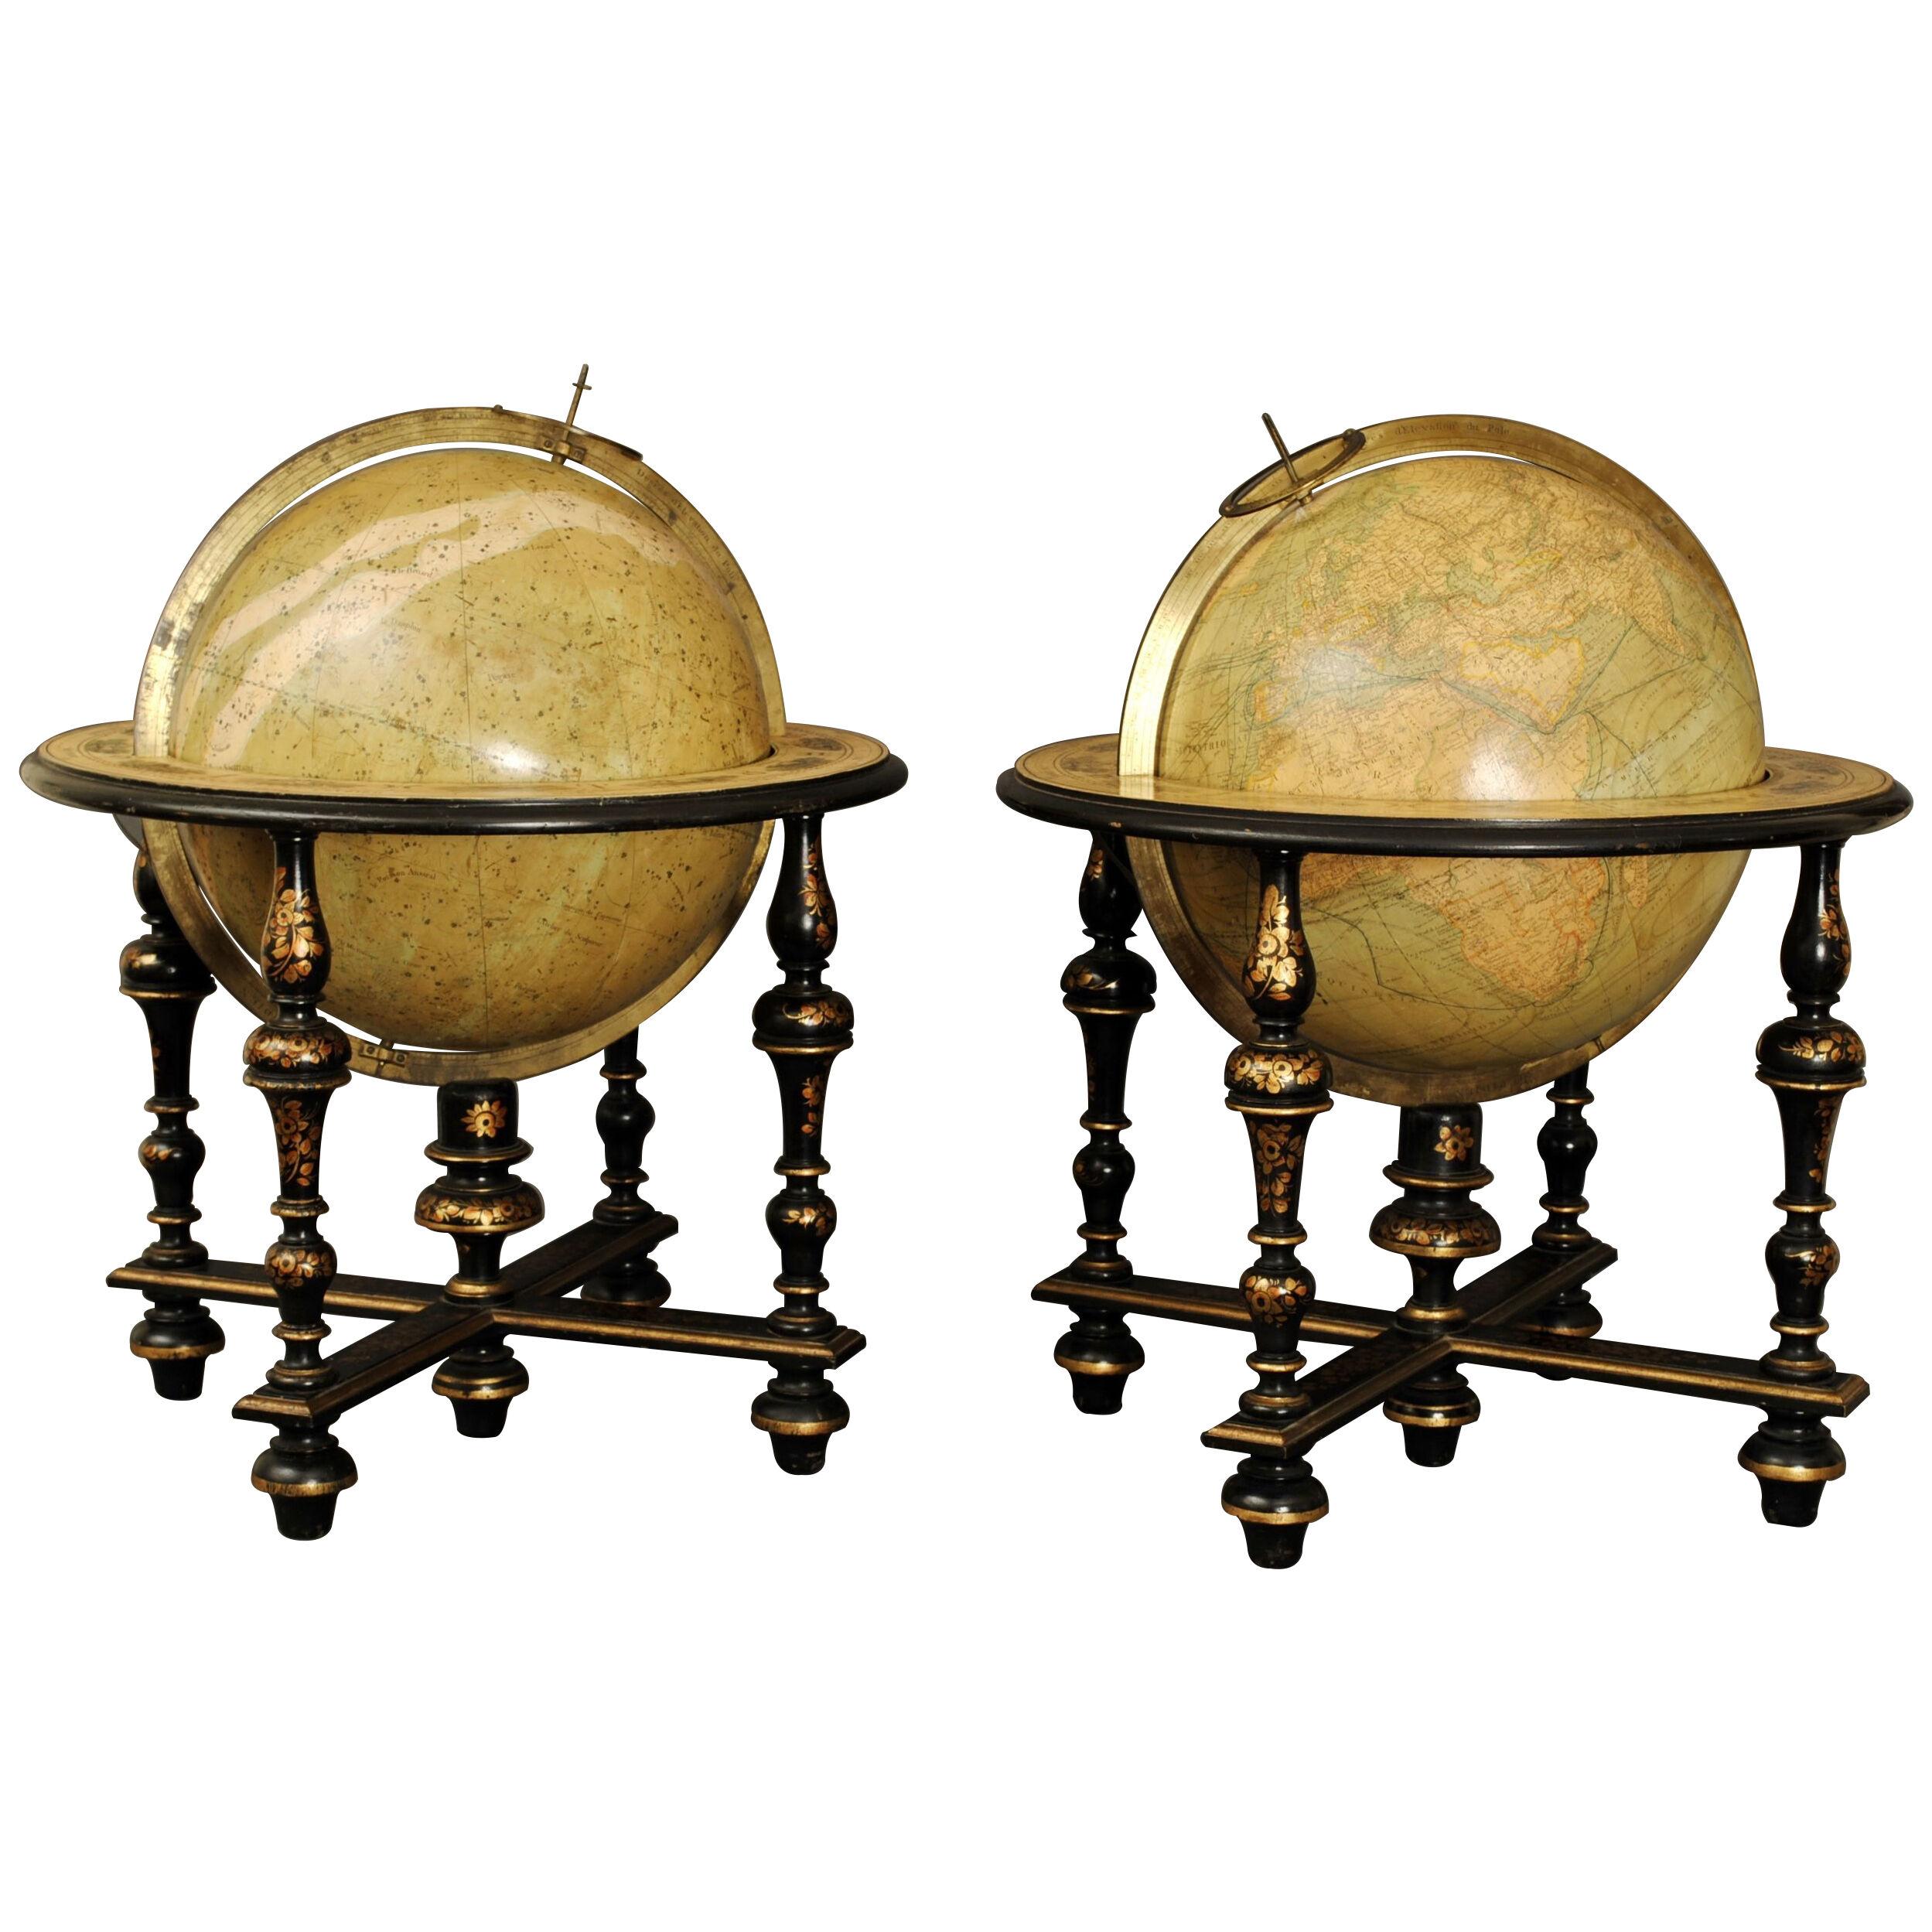 Pair of 19th Century Delamarche Table Globes